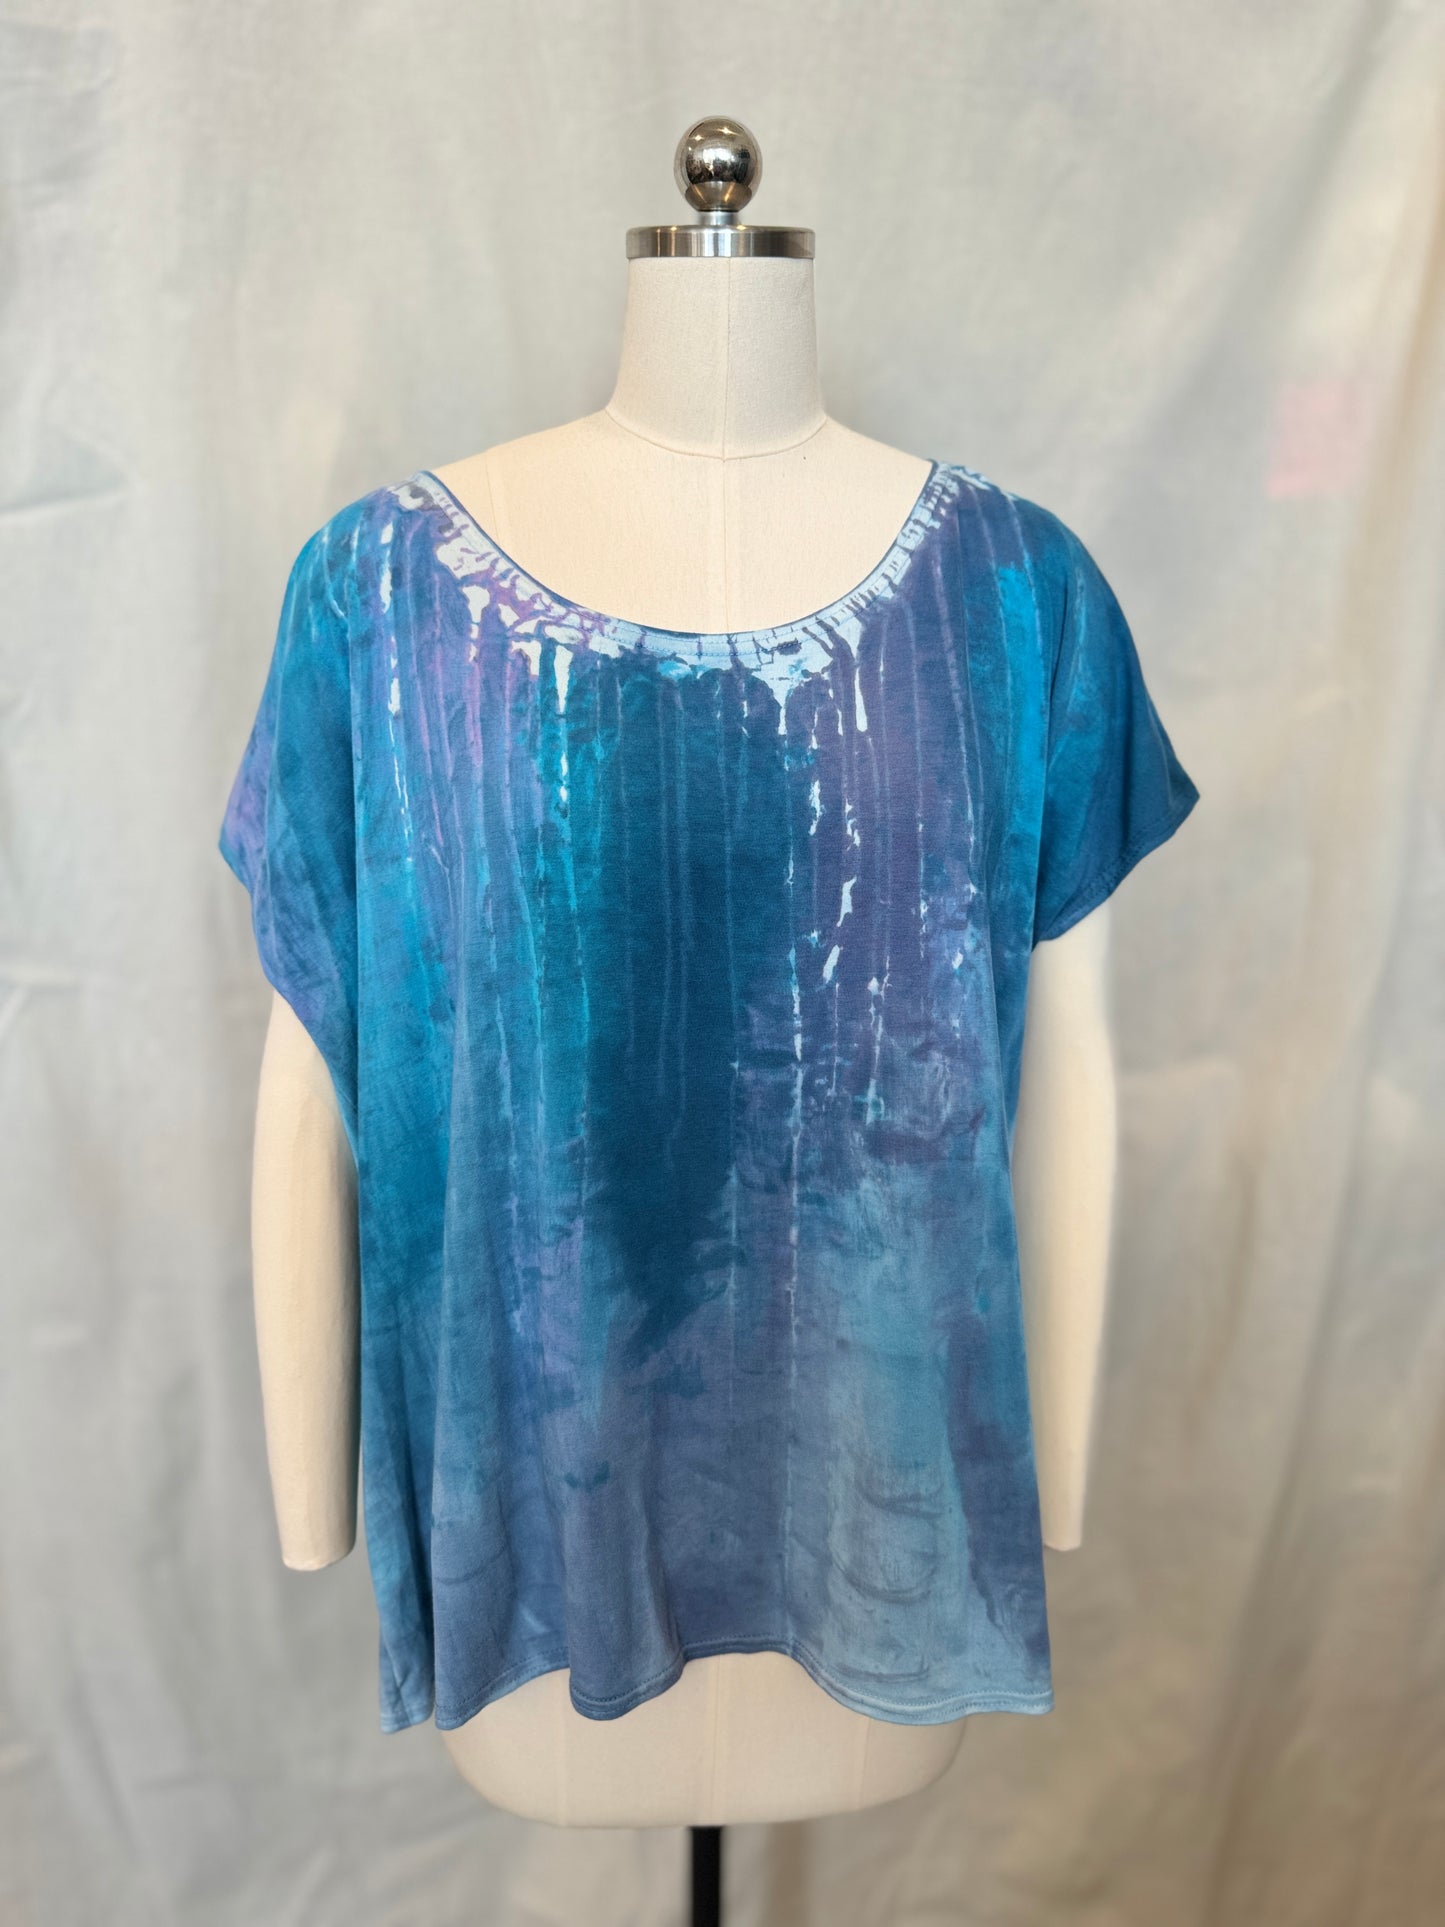 ELLIE TOP in Blue and Lavendar Dripstone